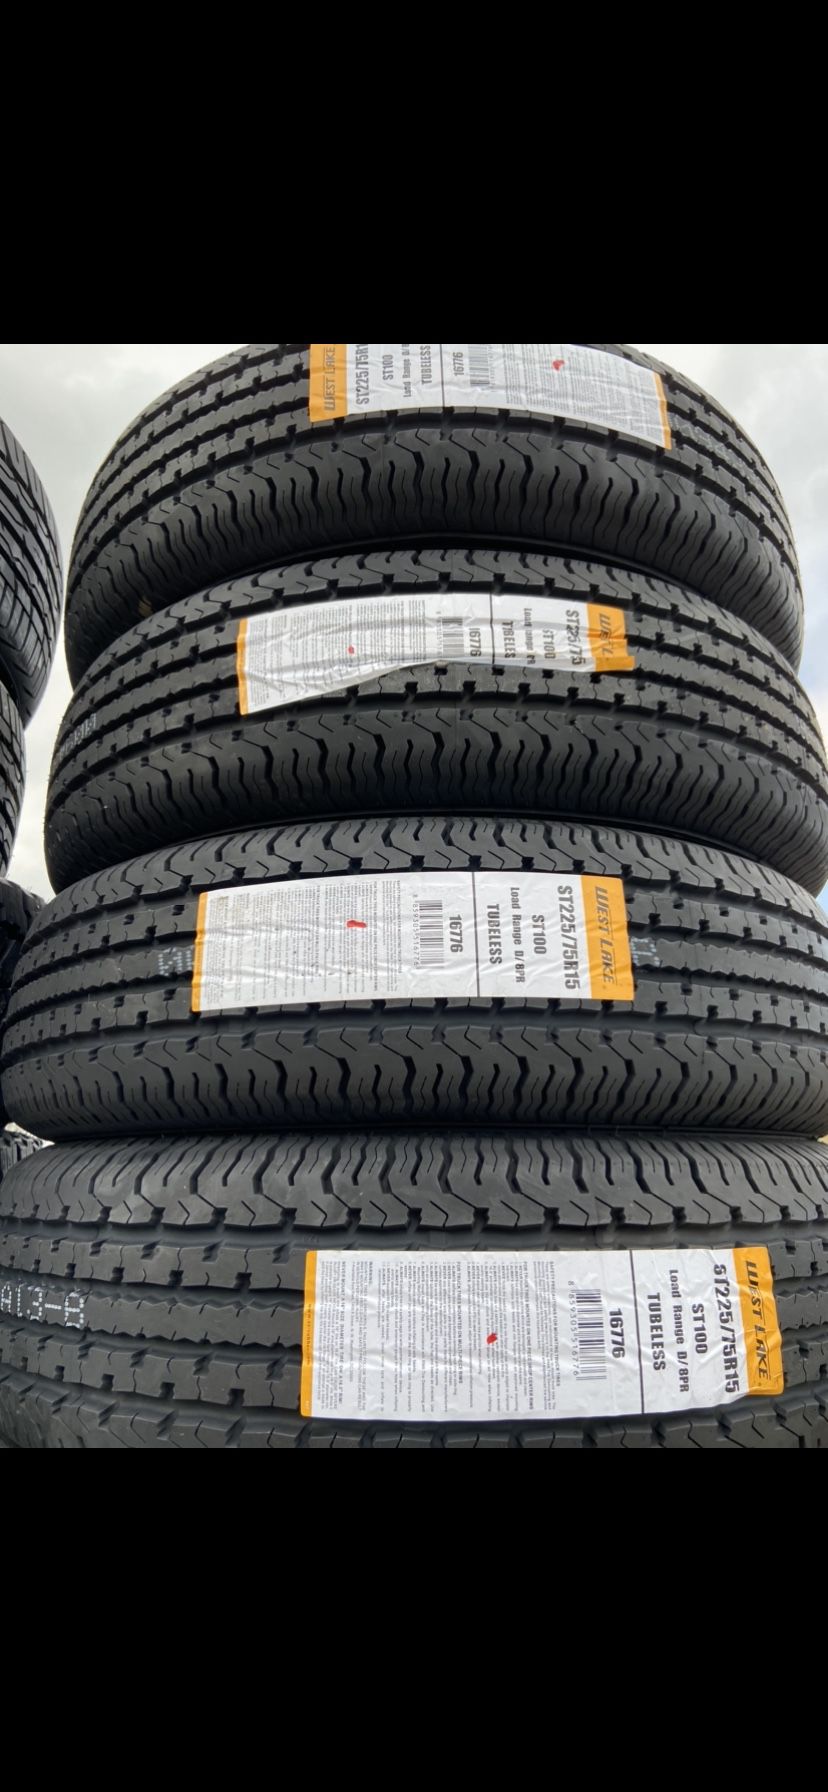 WEST LAKE Trailer tires ST225/75R15 $69 each new 8 ply trailer tires 225/75/15 10 PLY 225/75R/15 10ply